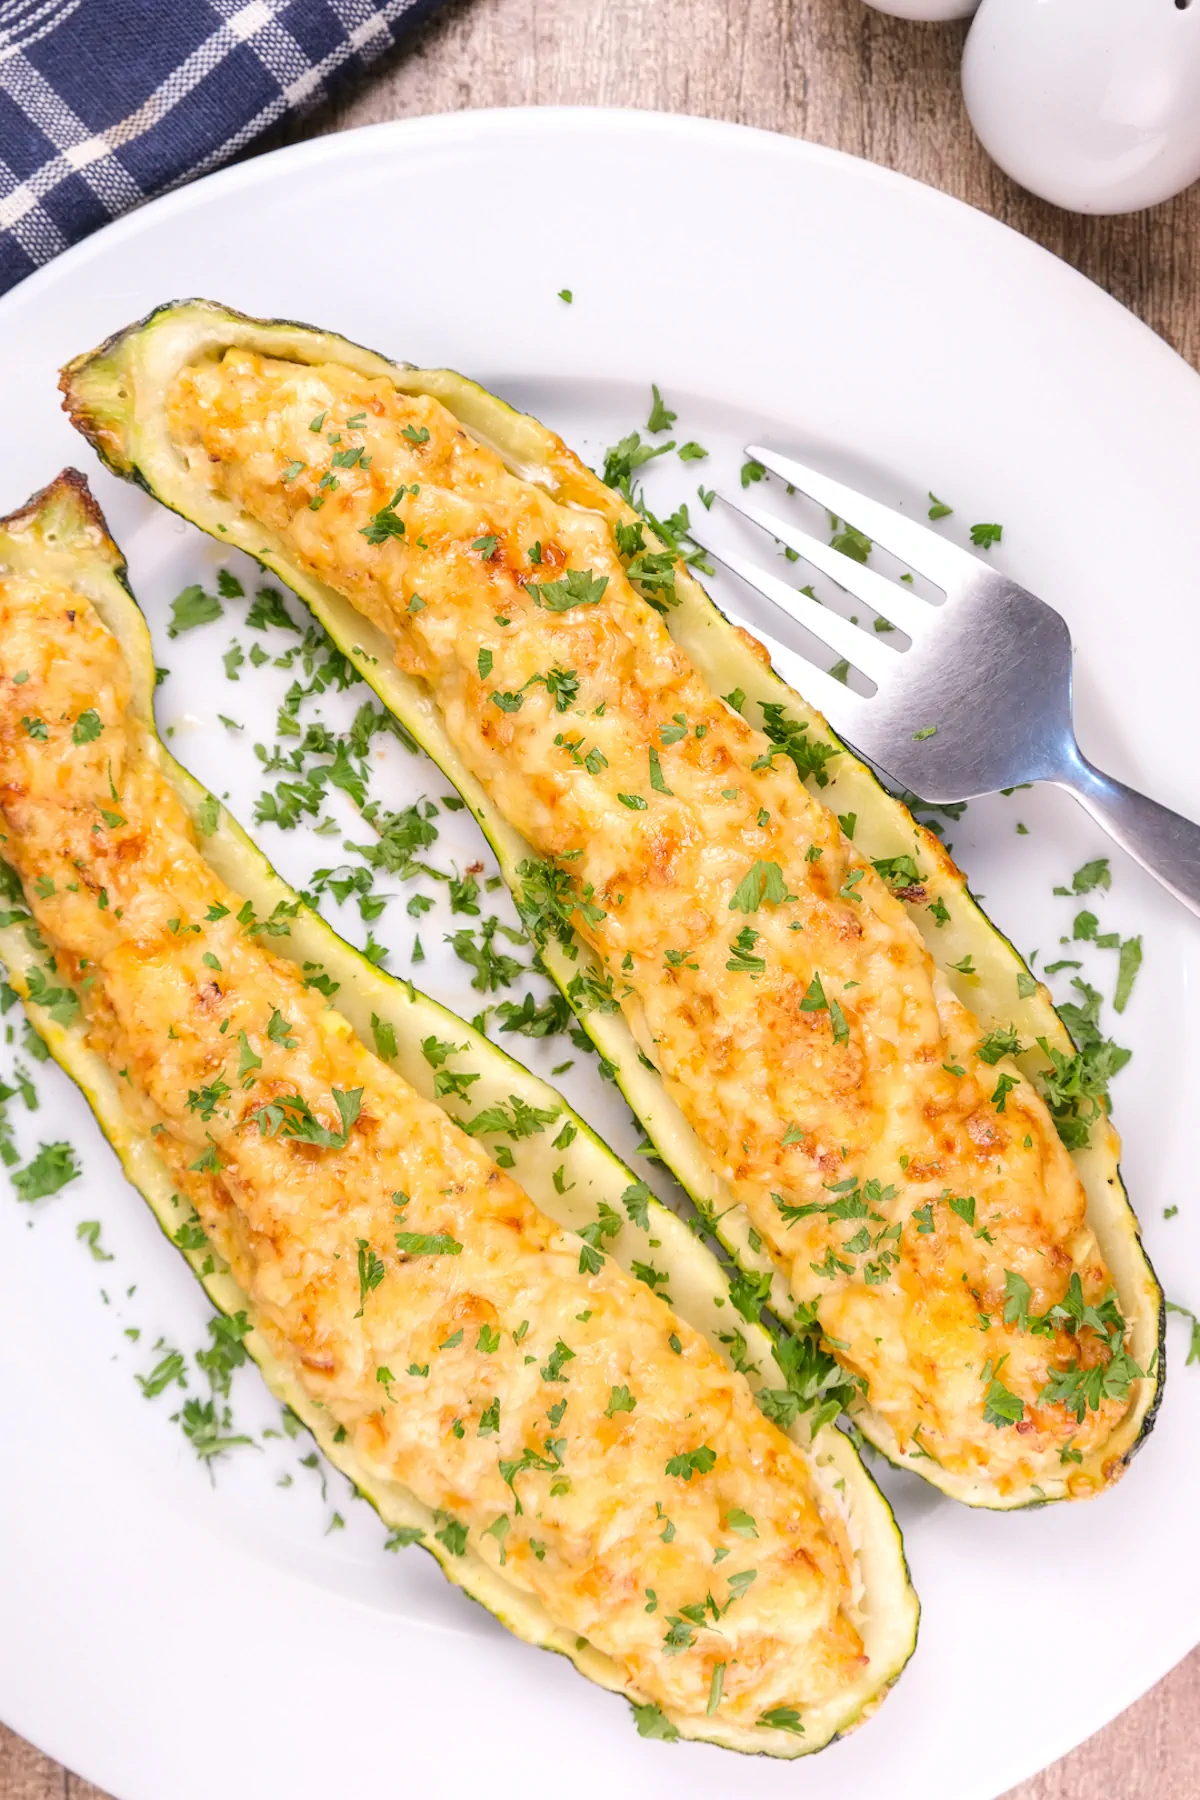 Keto stuffed zucchini boats served on a plate and garnished with chopped fresh herbs.